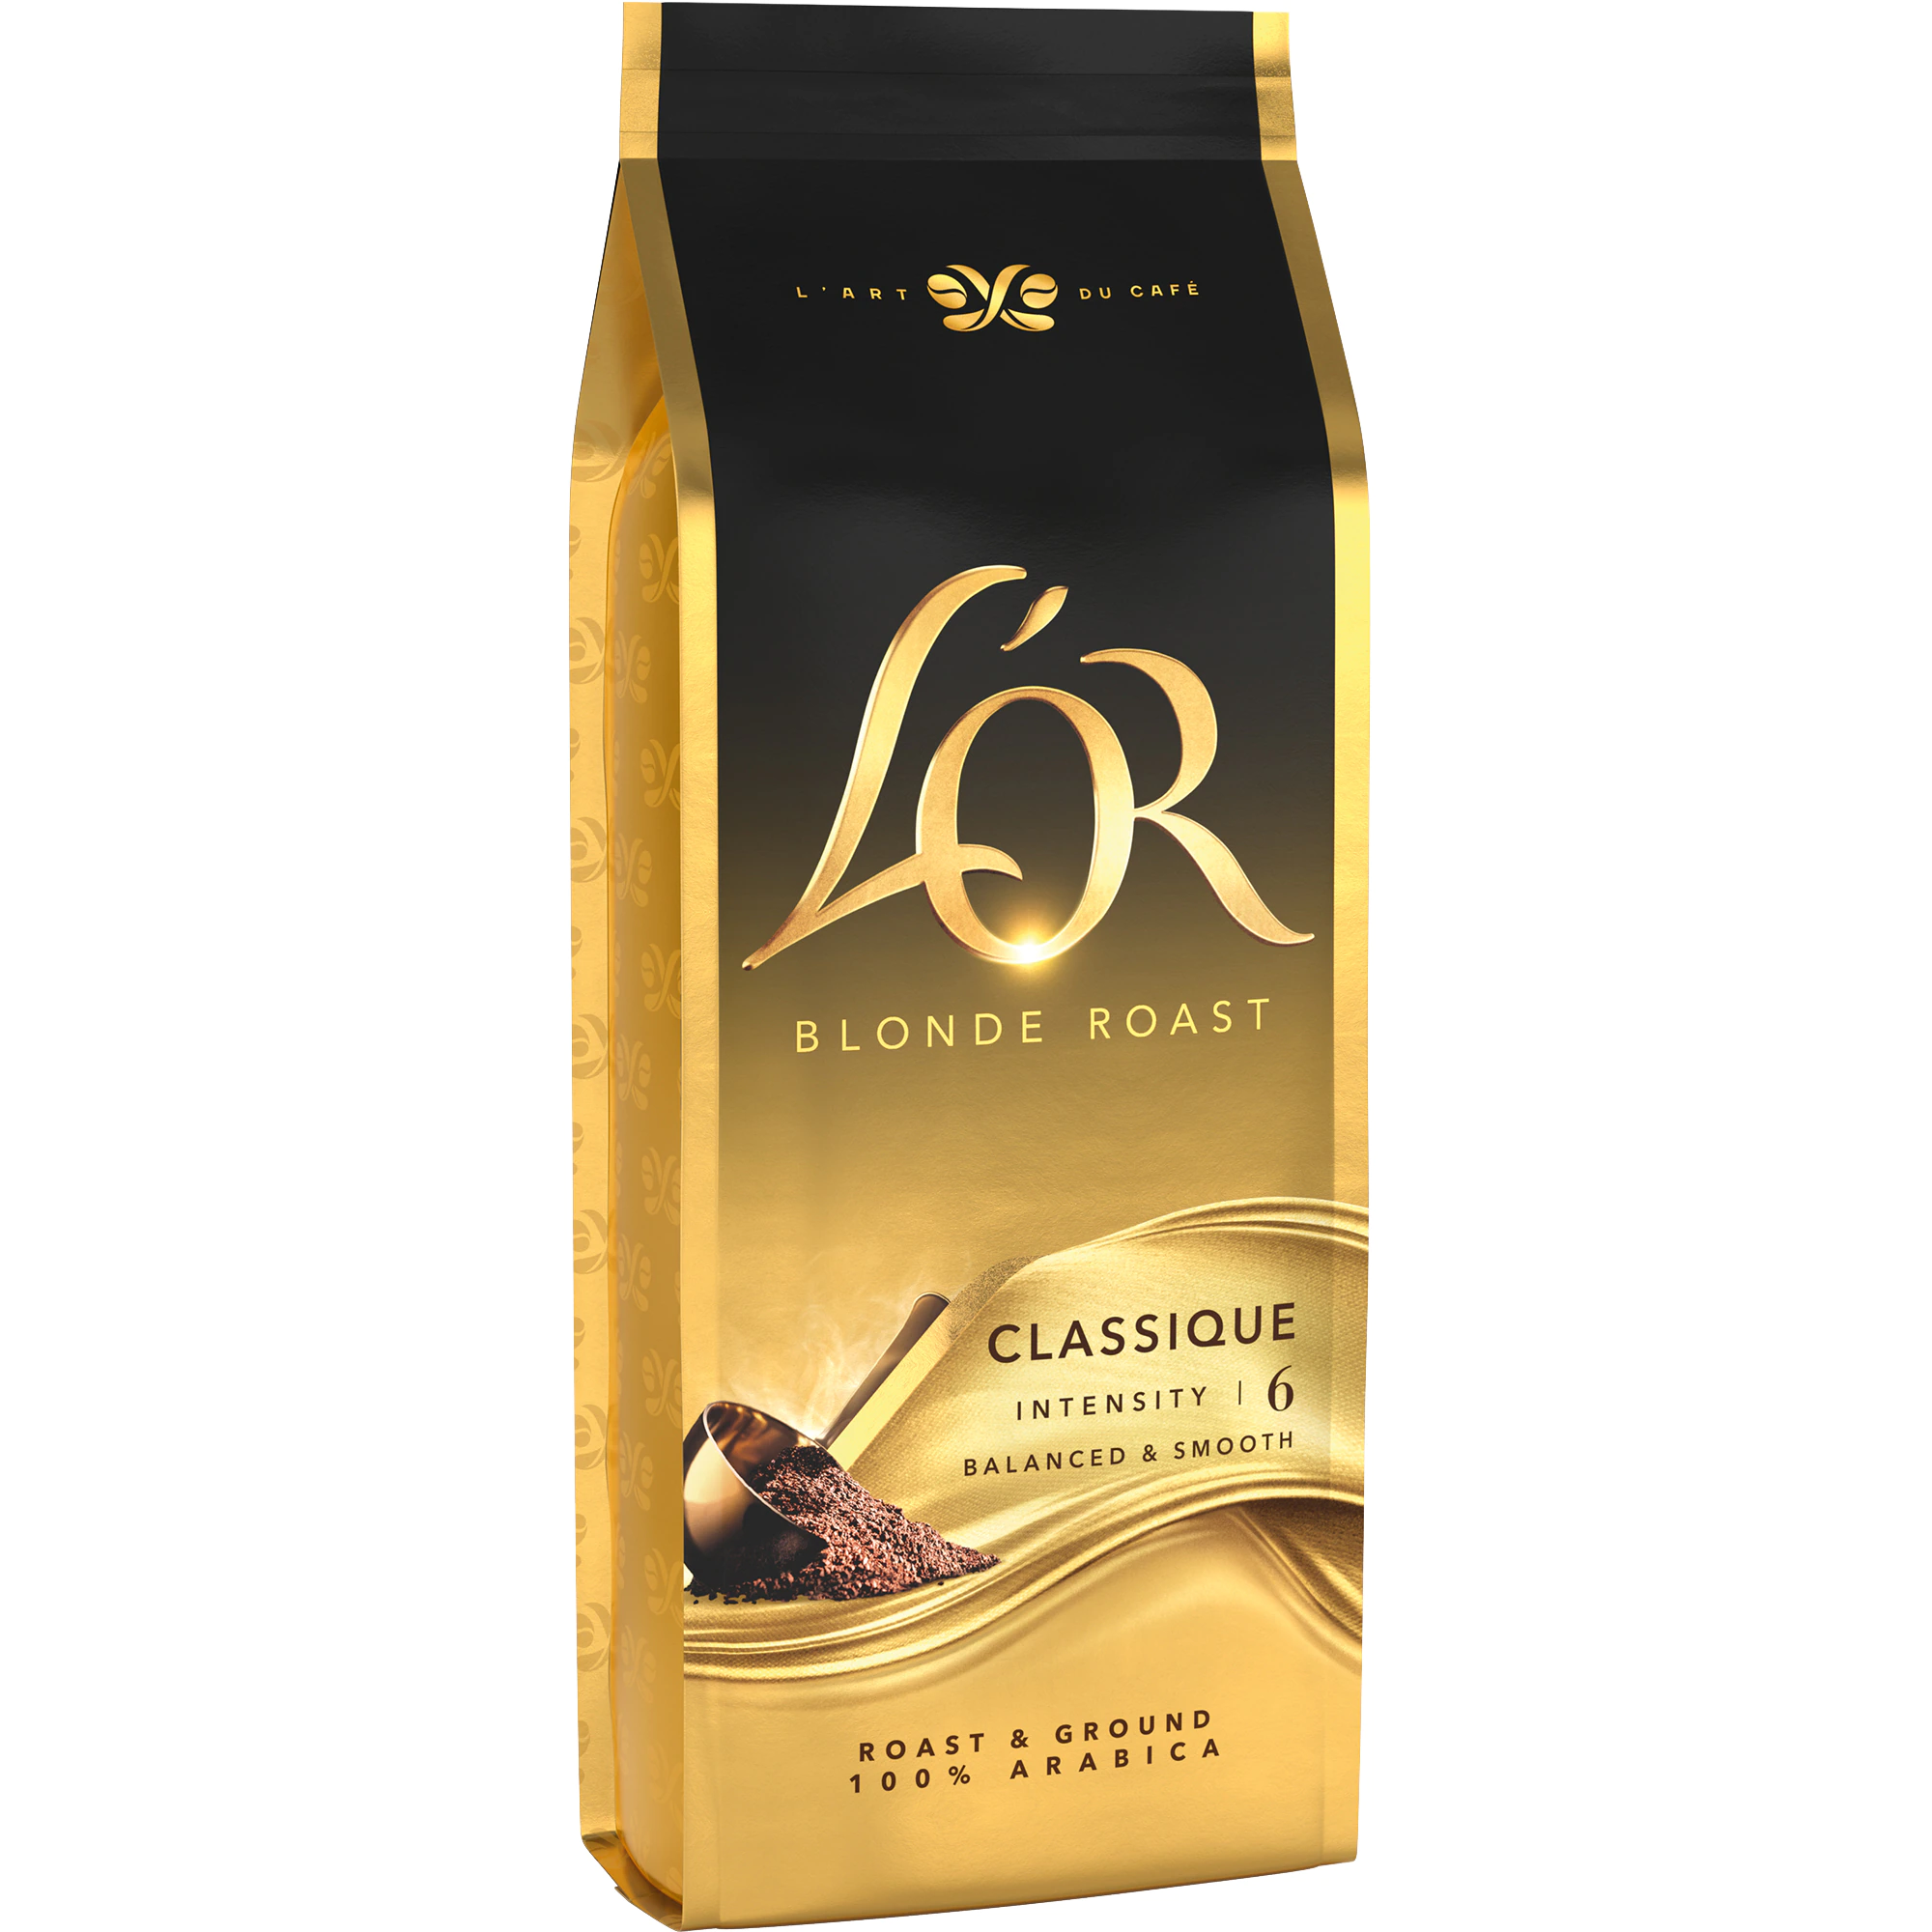 L'OR Crema Absolu Clasique Cafea Boabe 500g [1]